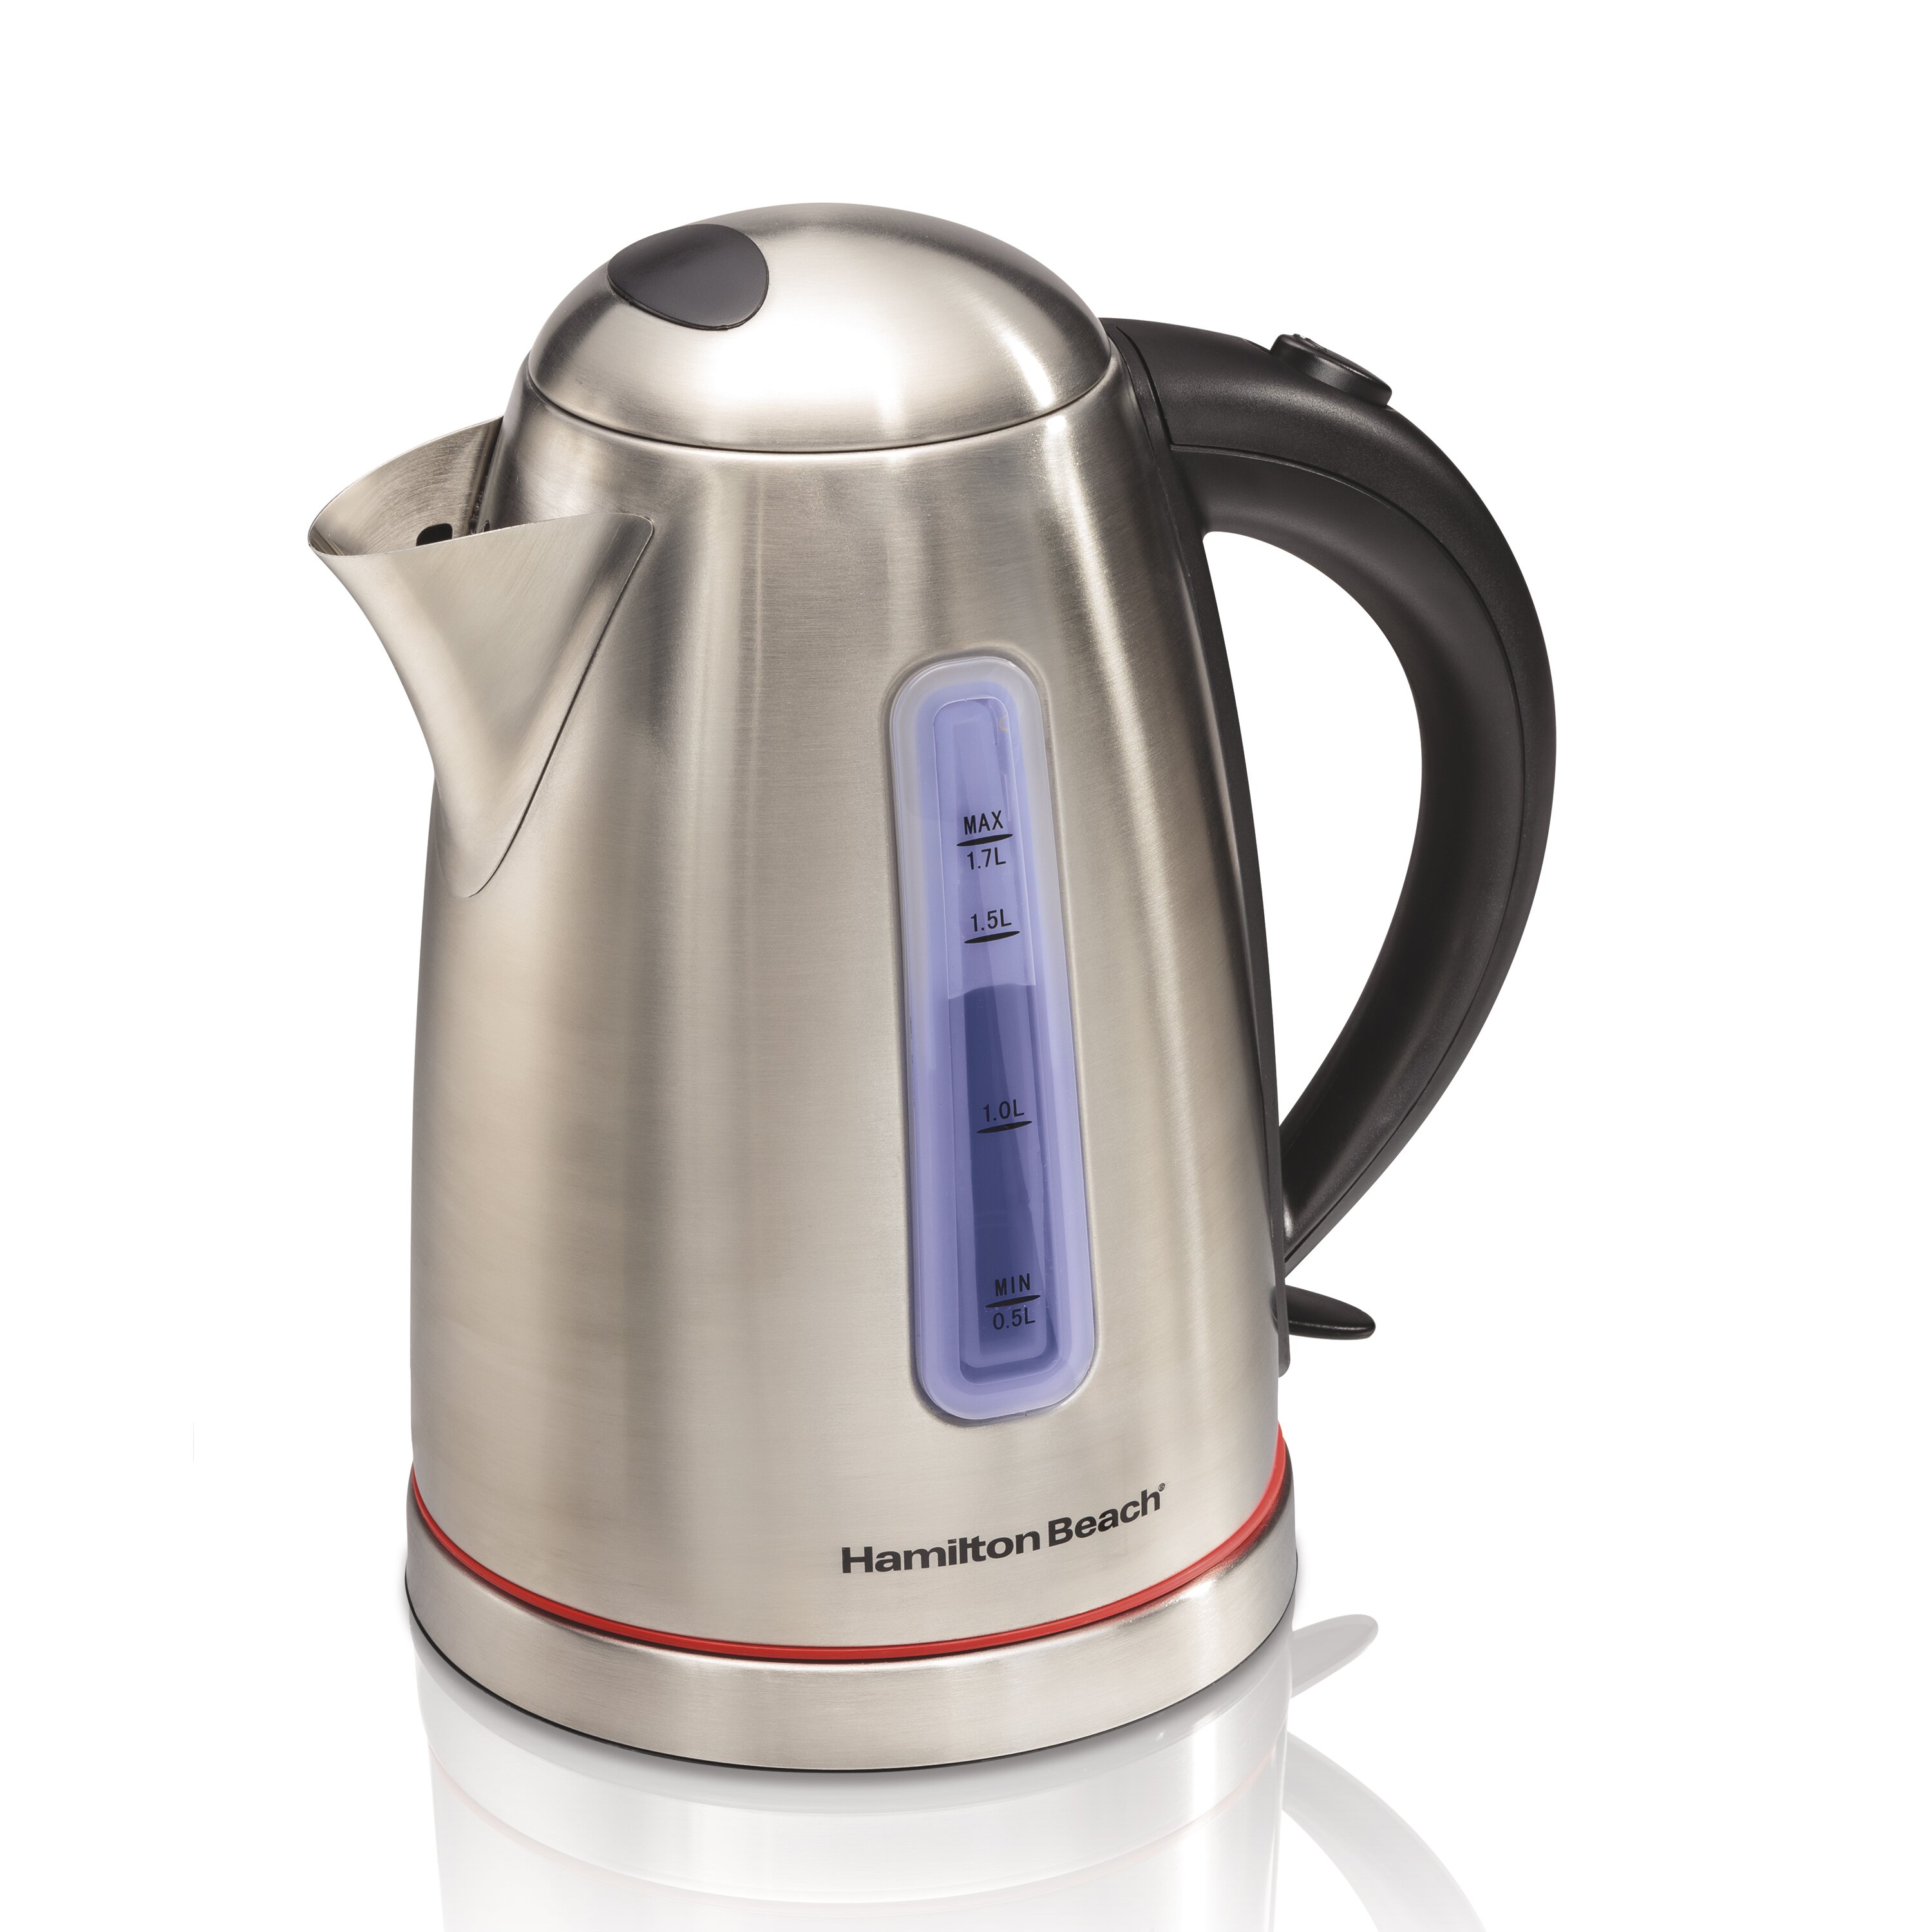 What are the features that make for a great electric tea kettle?